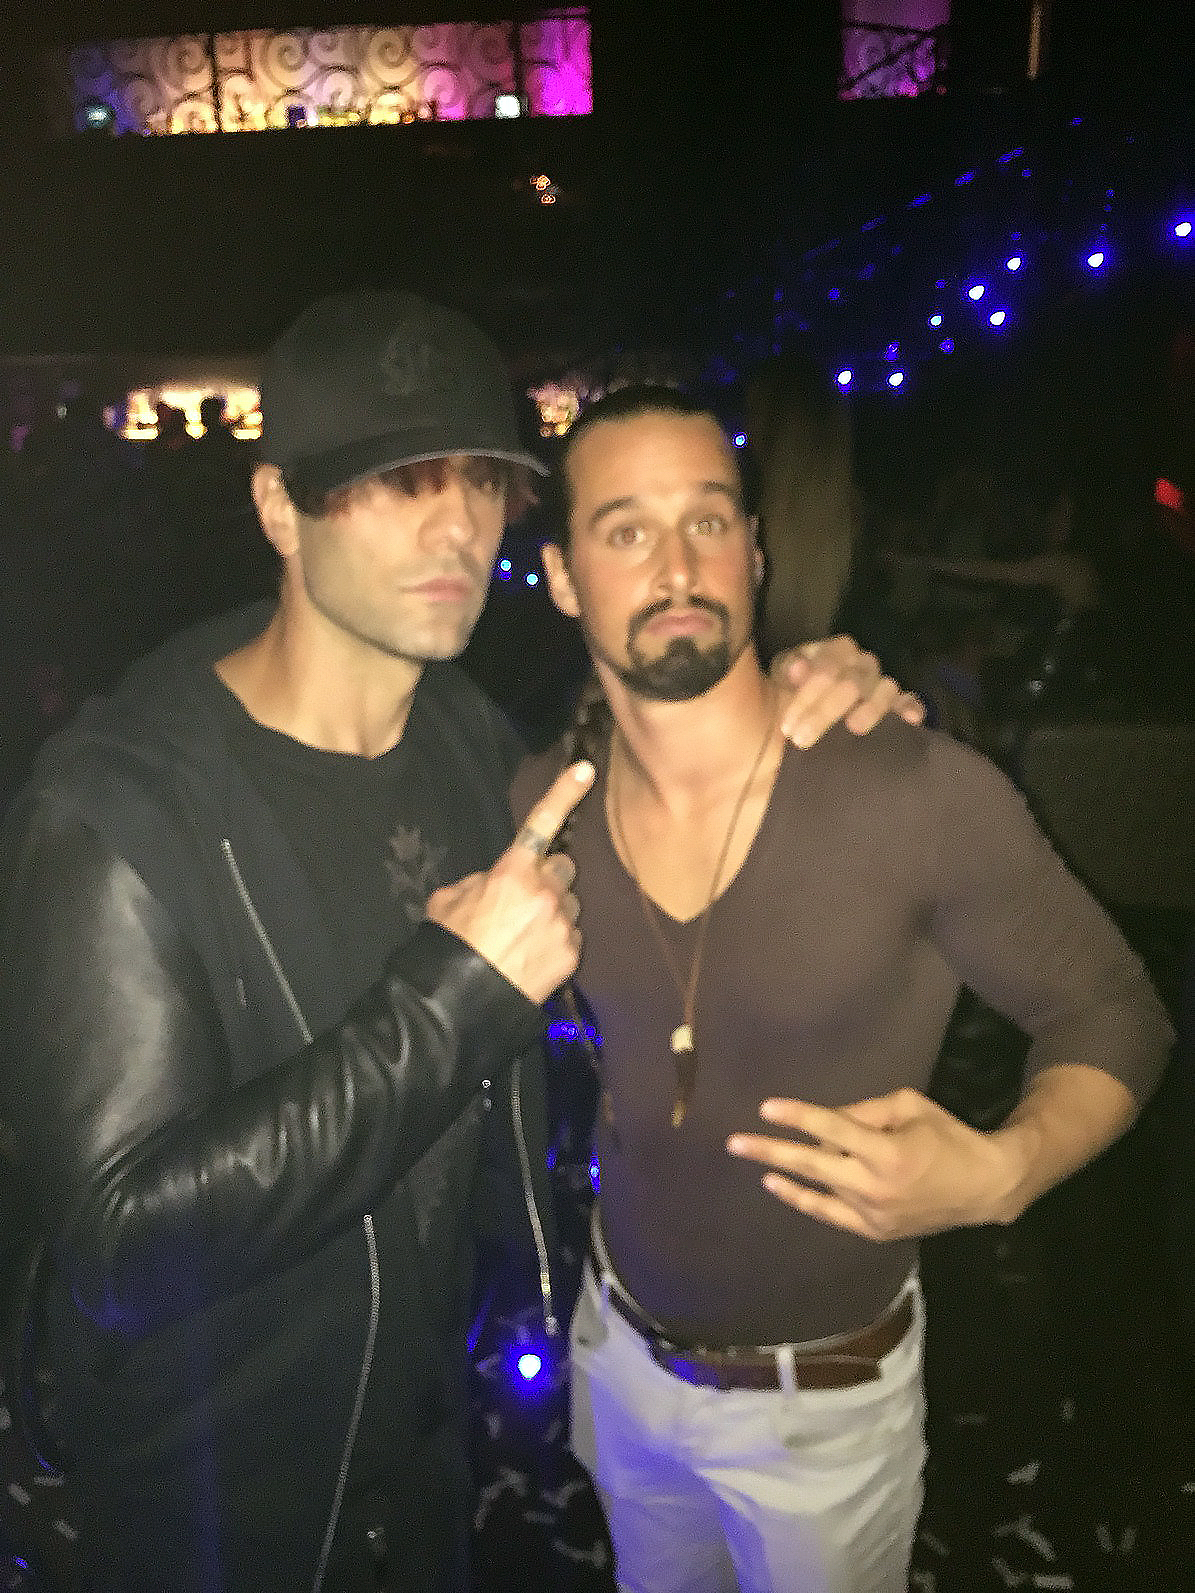 Criss Angel and Sancho Martin afterparty Cirque du Soleil Believe Show